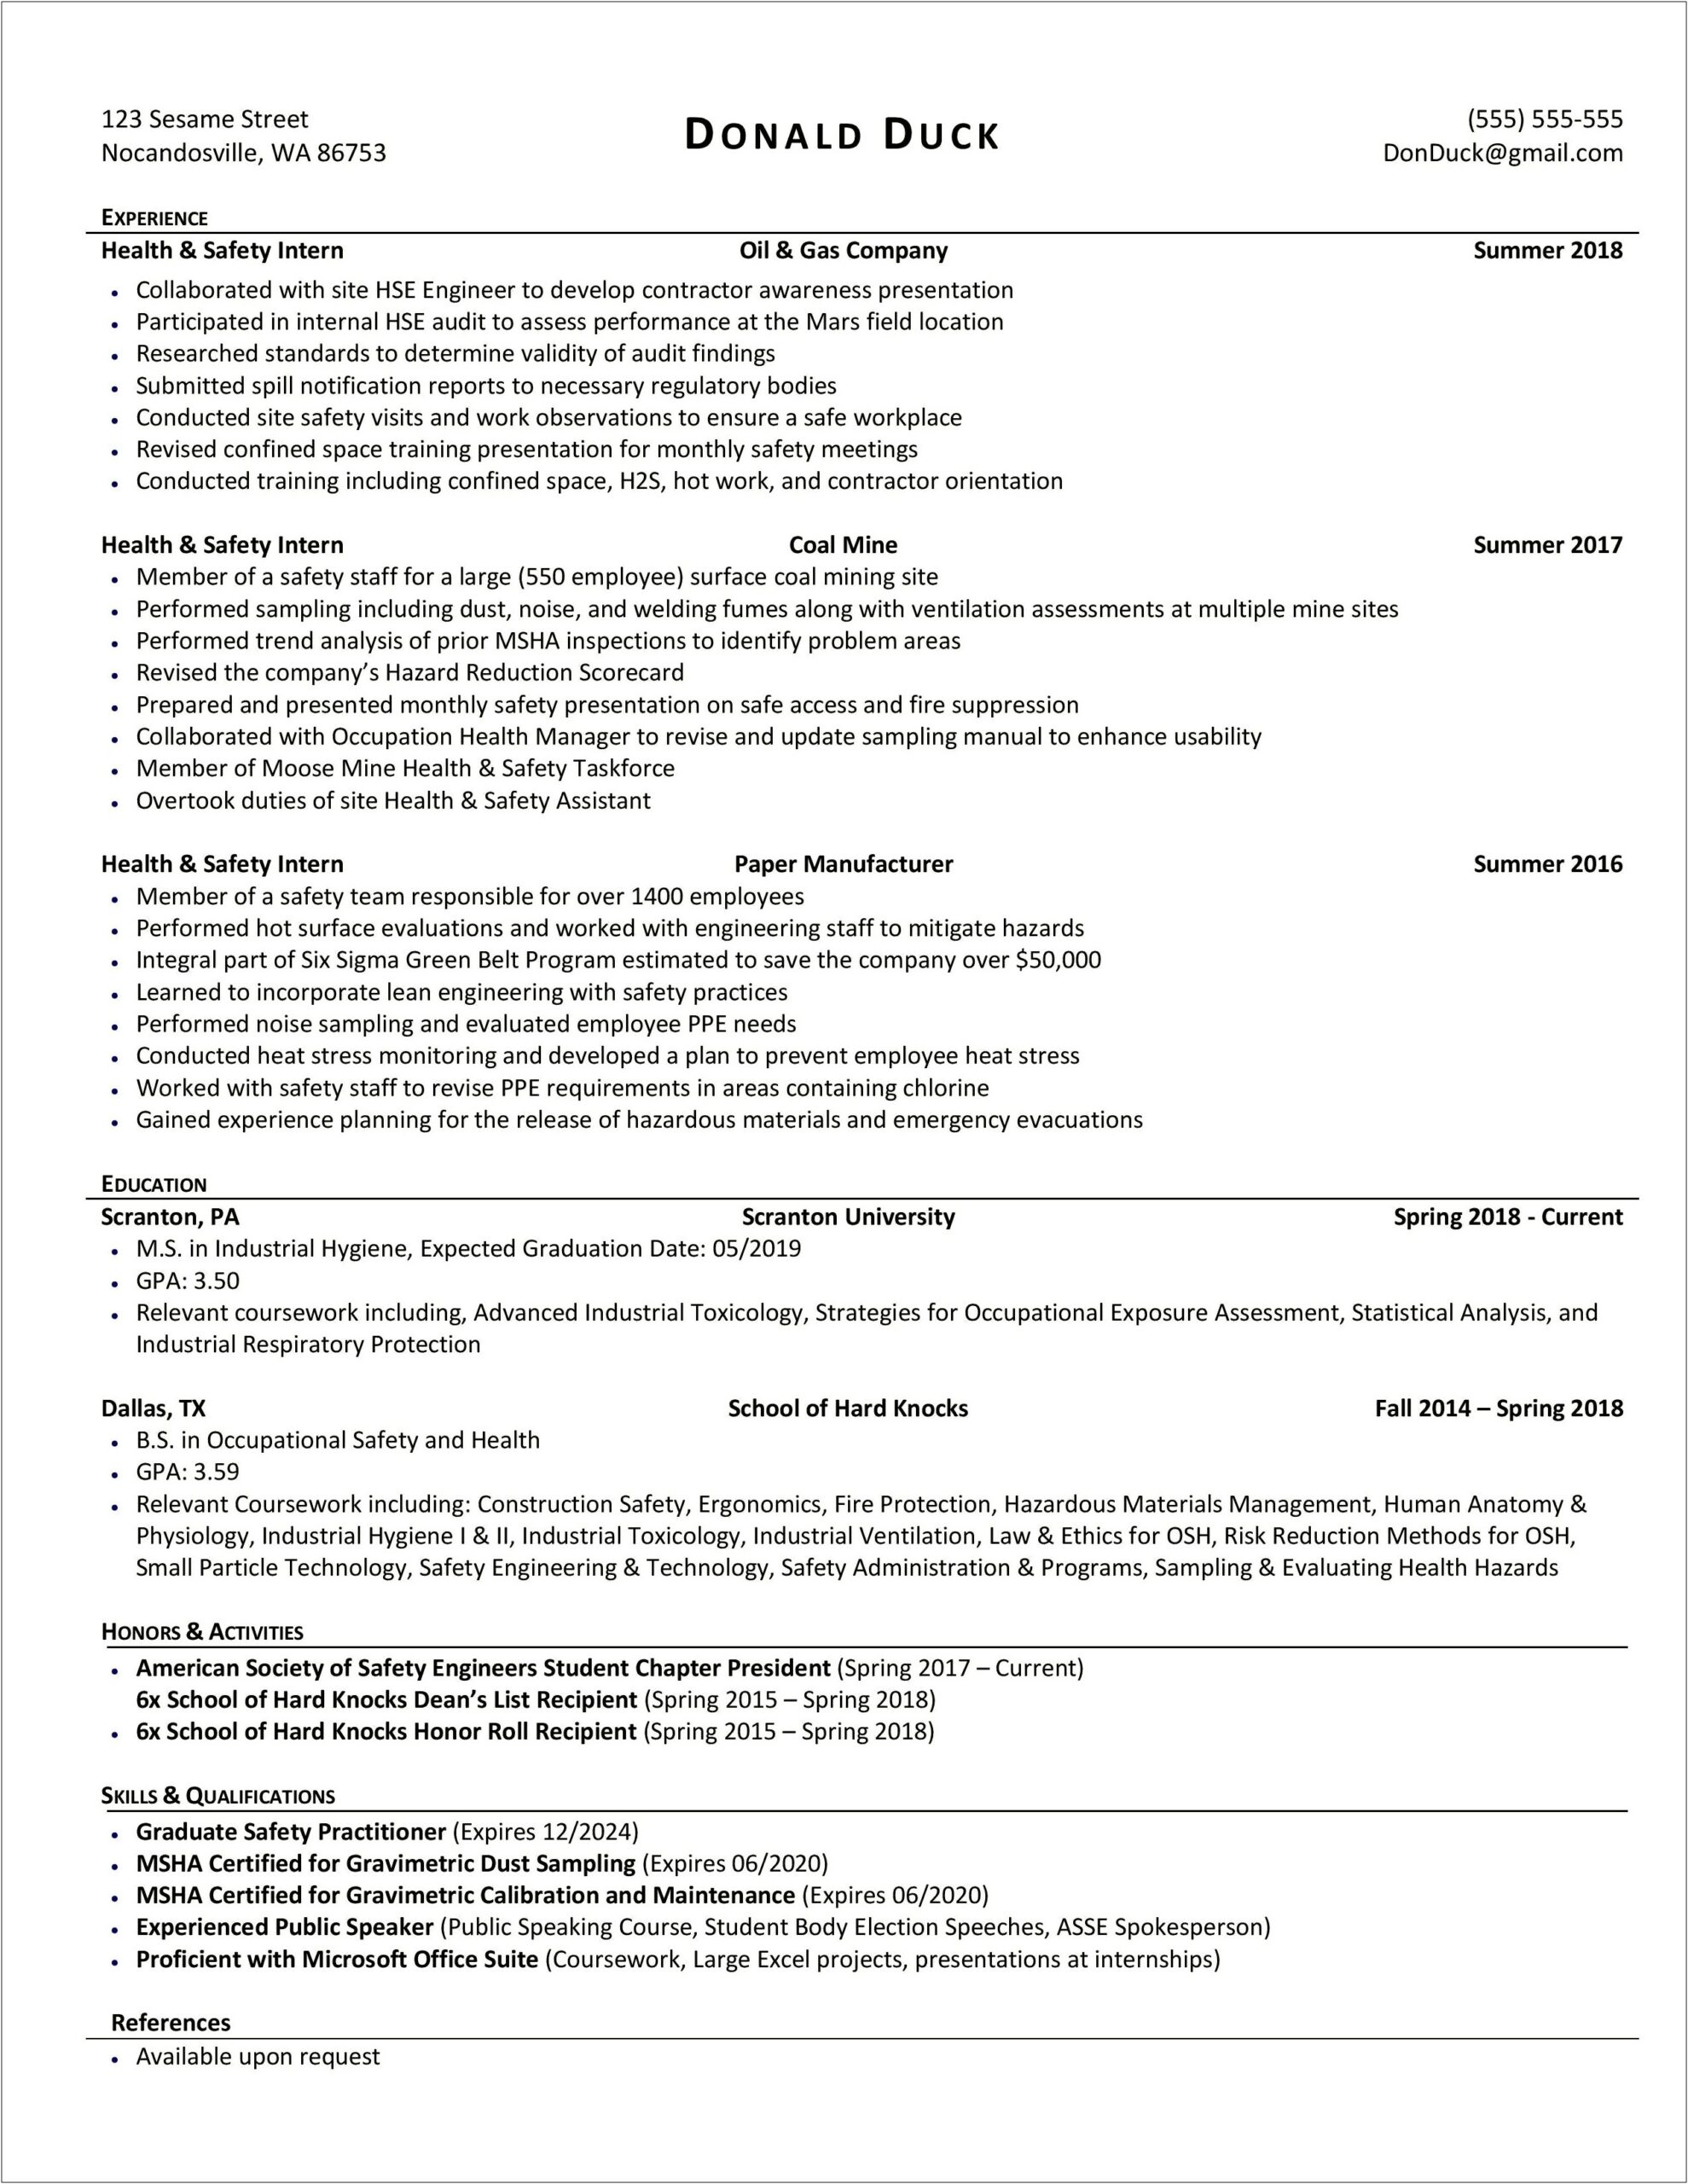 Where To Put Relevant Coursework On Resume